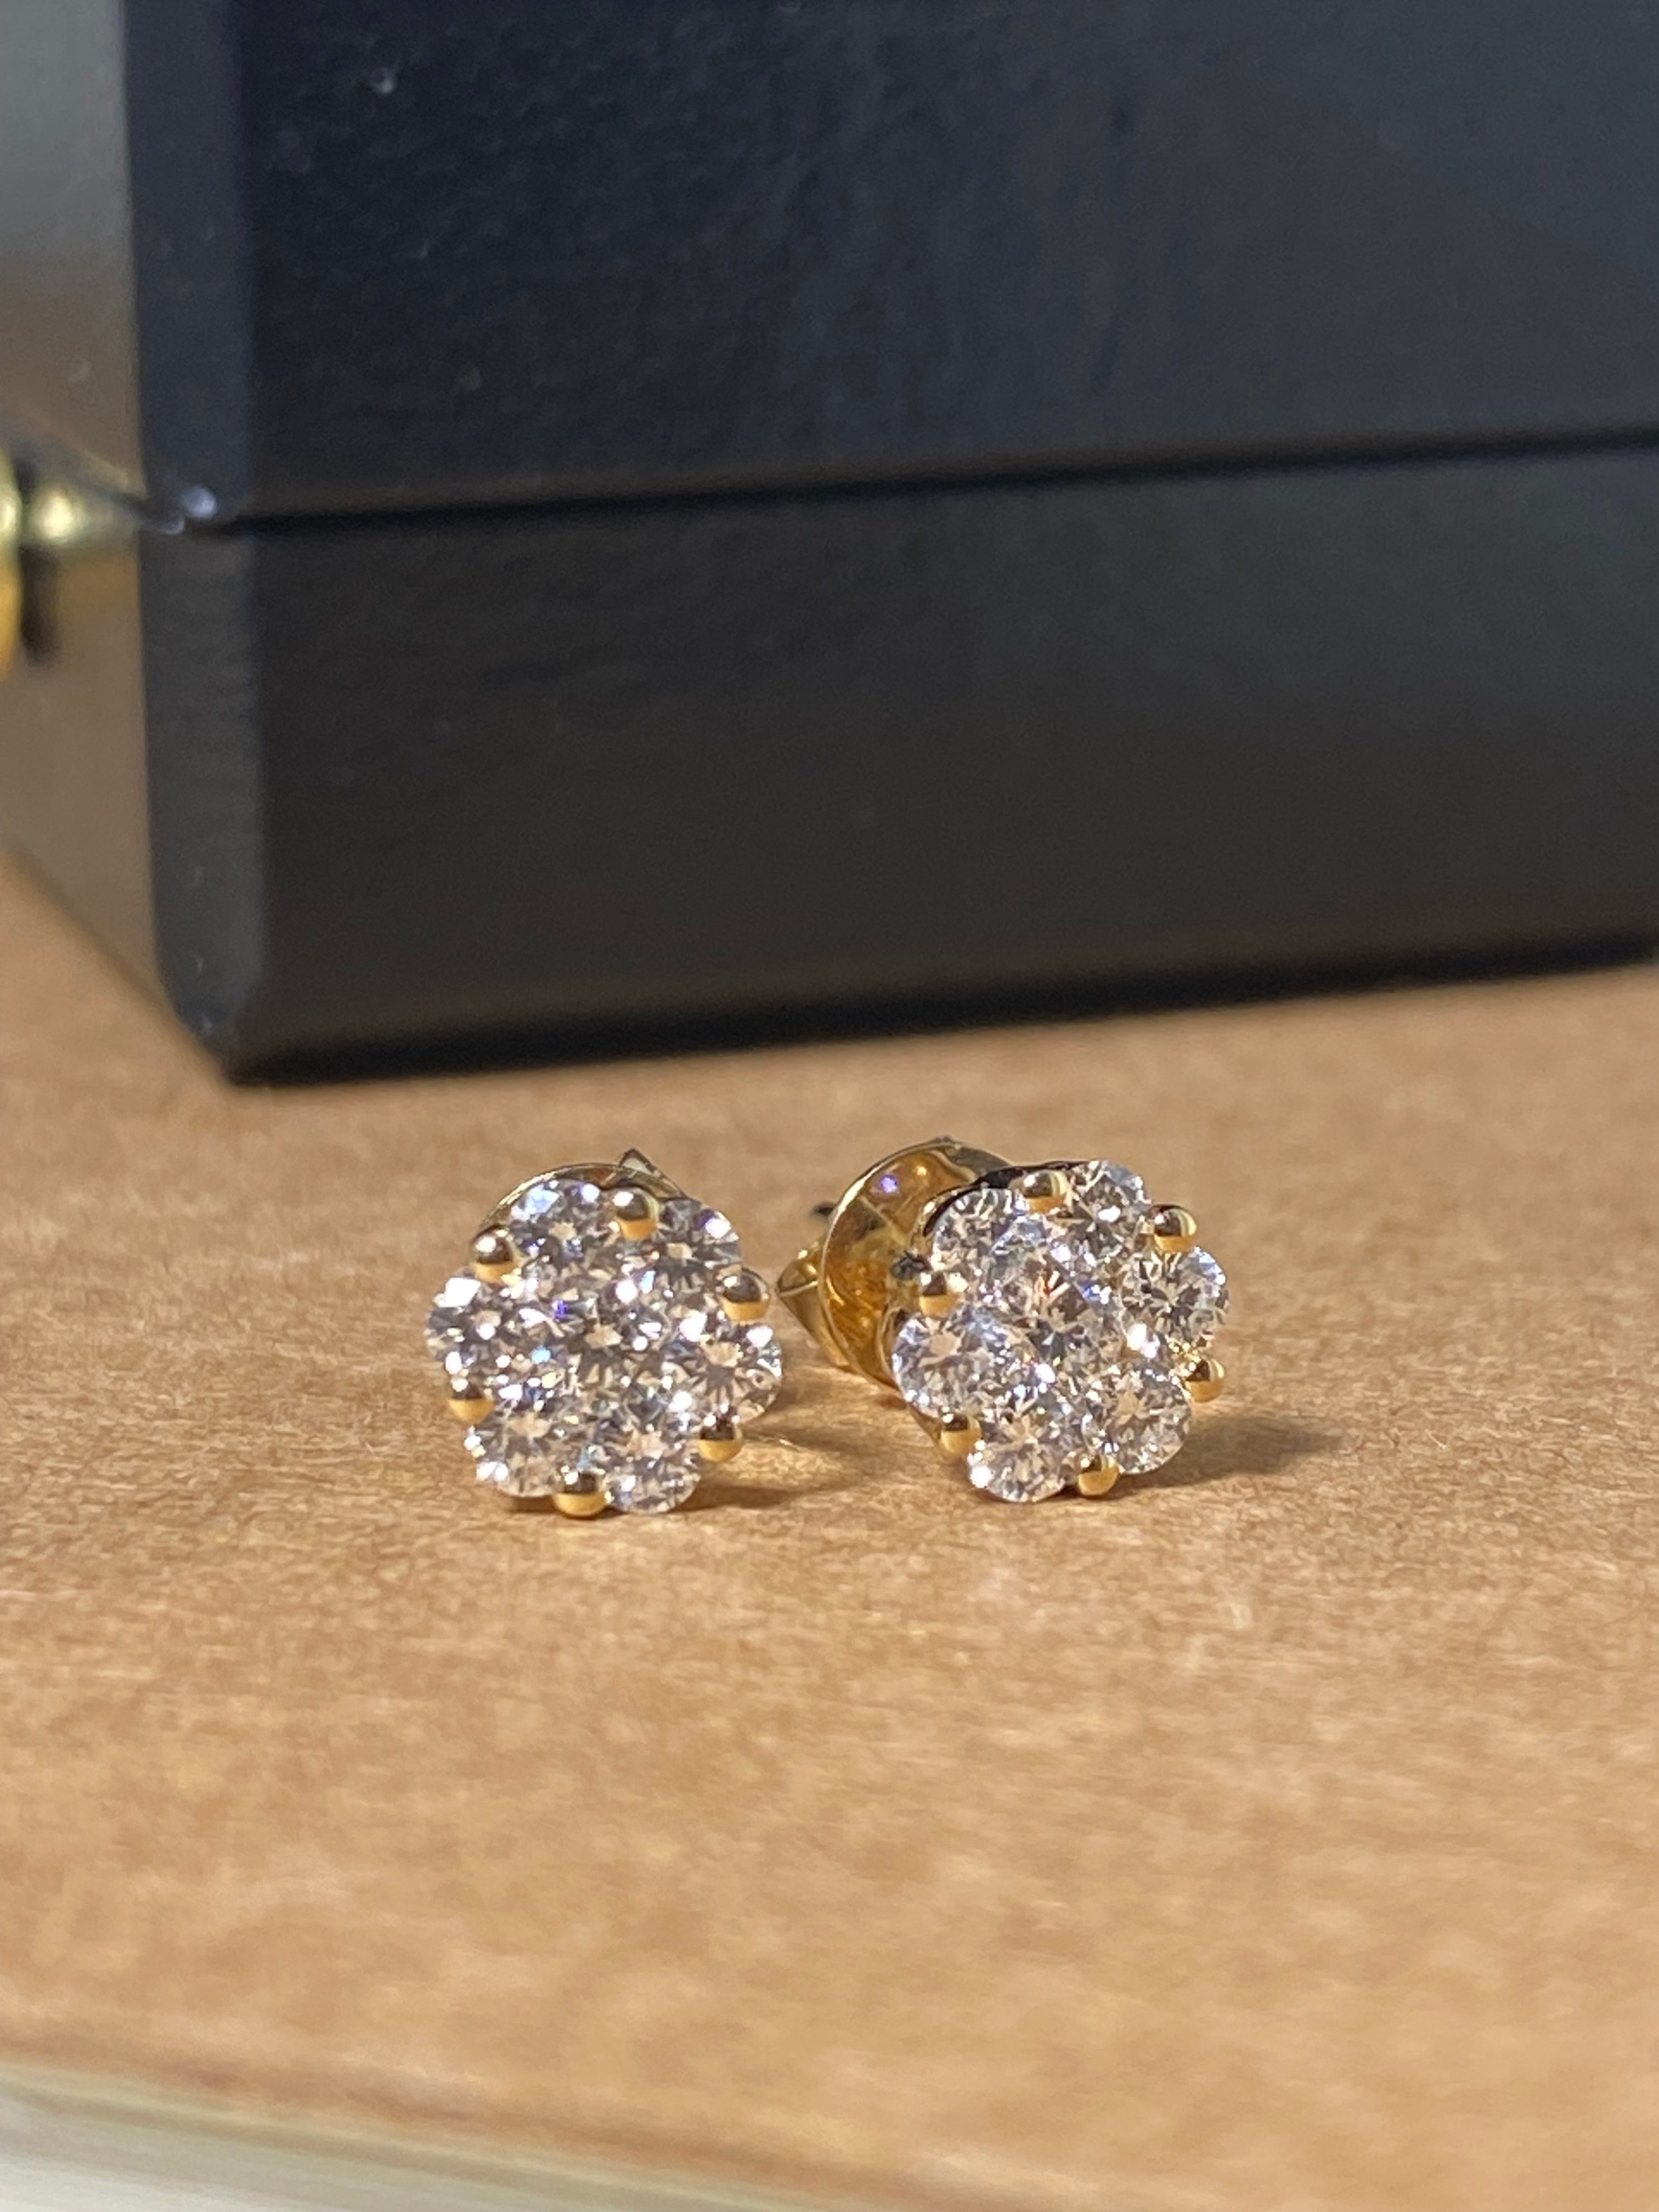 Magnificent 0.85ct Diamond Cluster Daisy Stud Earrings in 18K Rose Gold. E/VS.